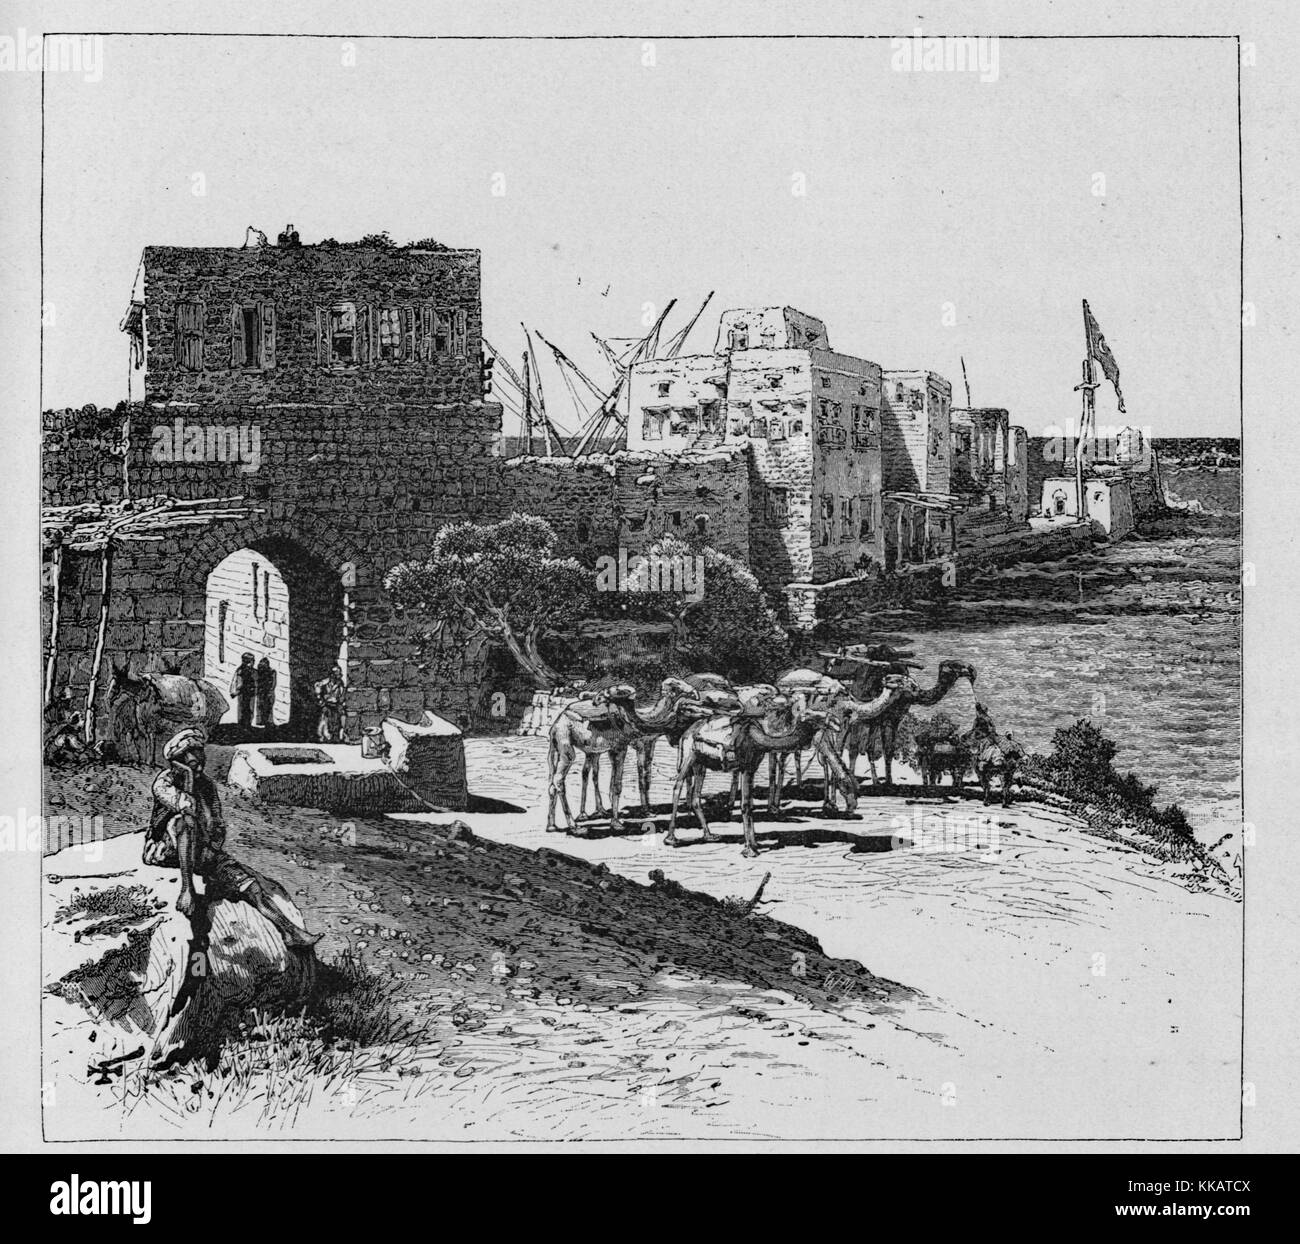 A depiction of the Gate of Tyre, the city is believed to have been founded by the Phoenicians as early as 2750 BCE, Lebanon, 1882. From the New York Public Library. Stock Photo